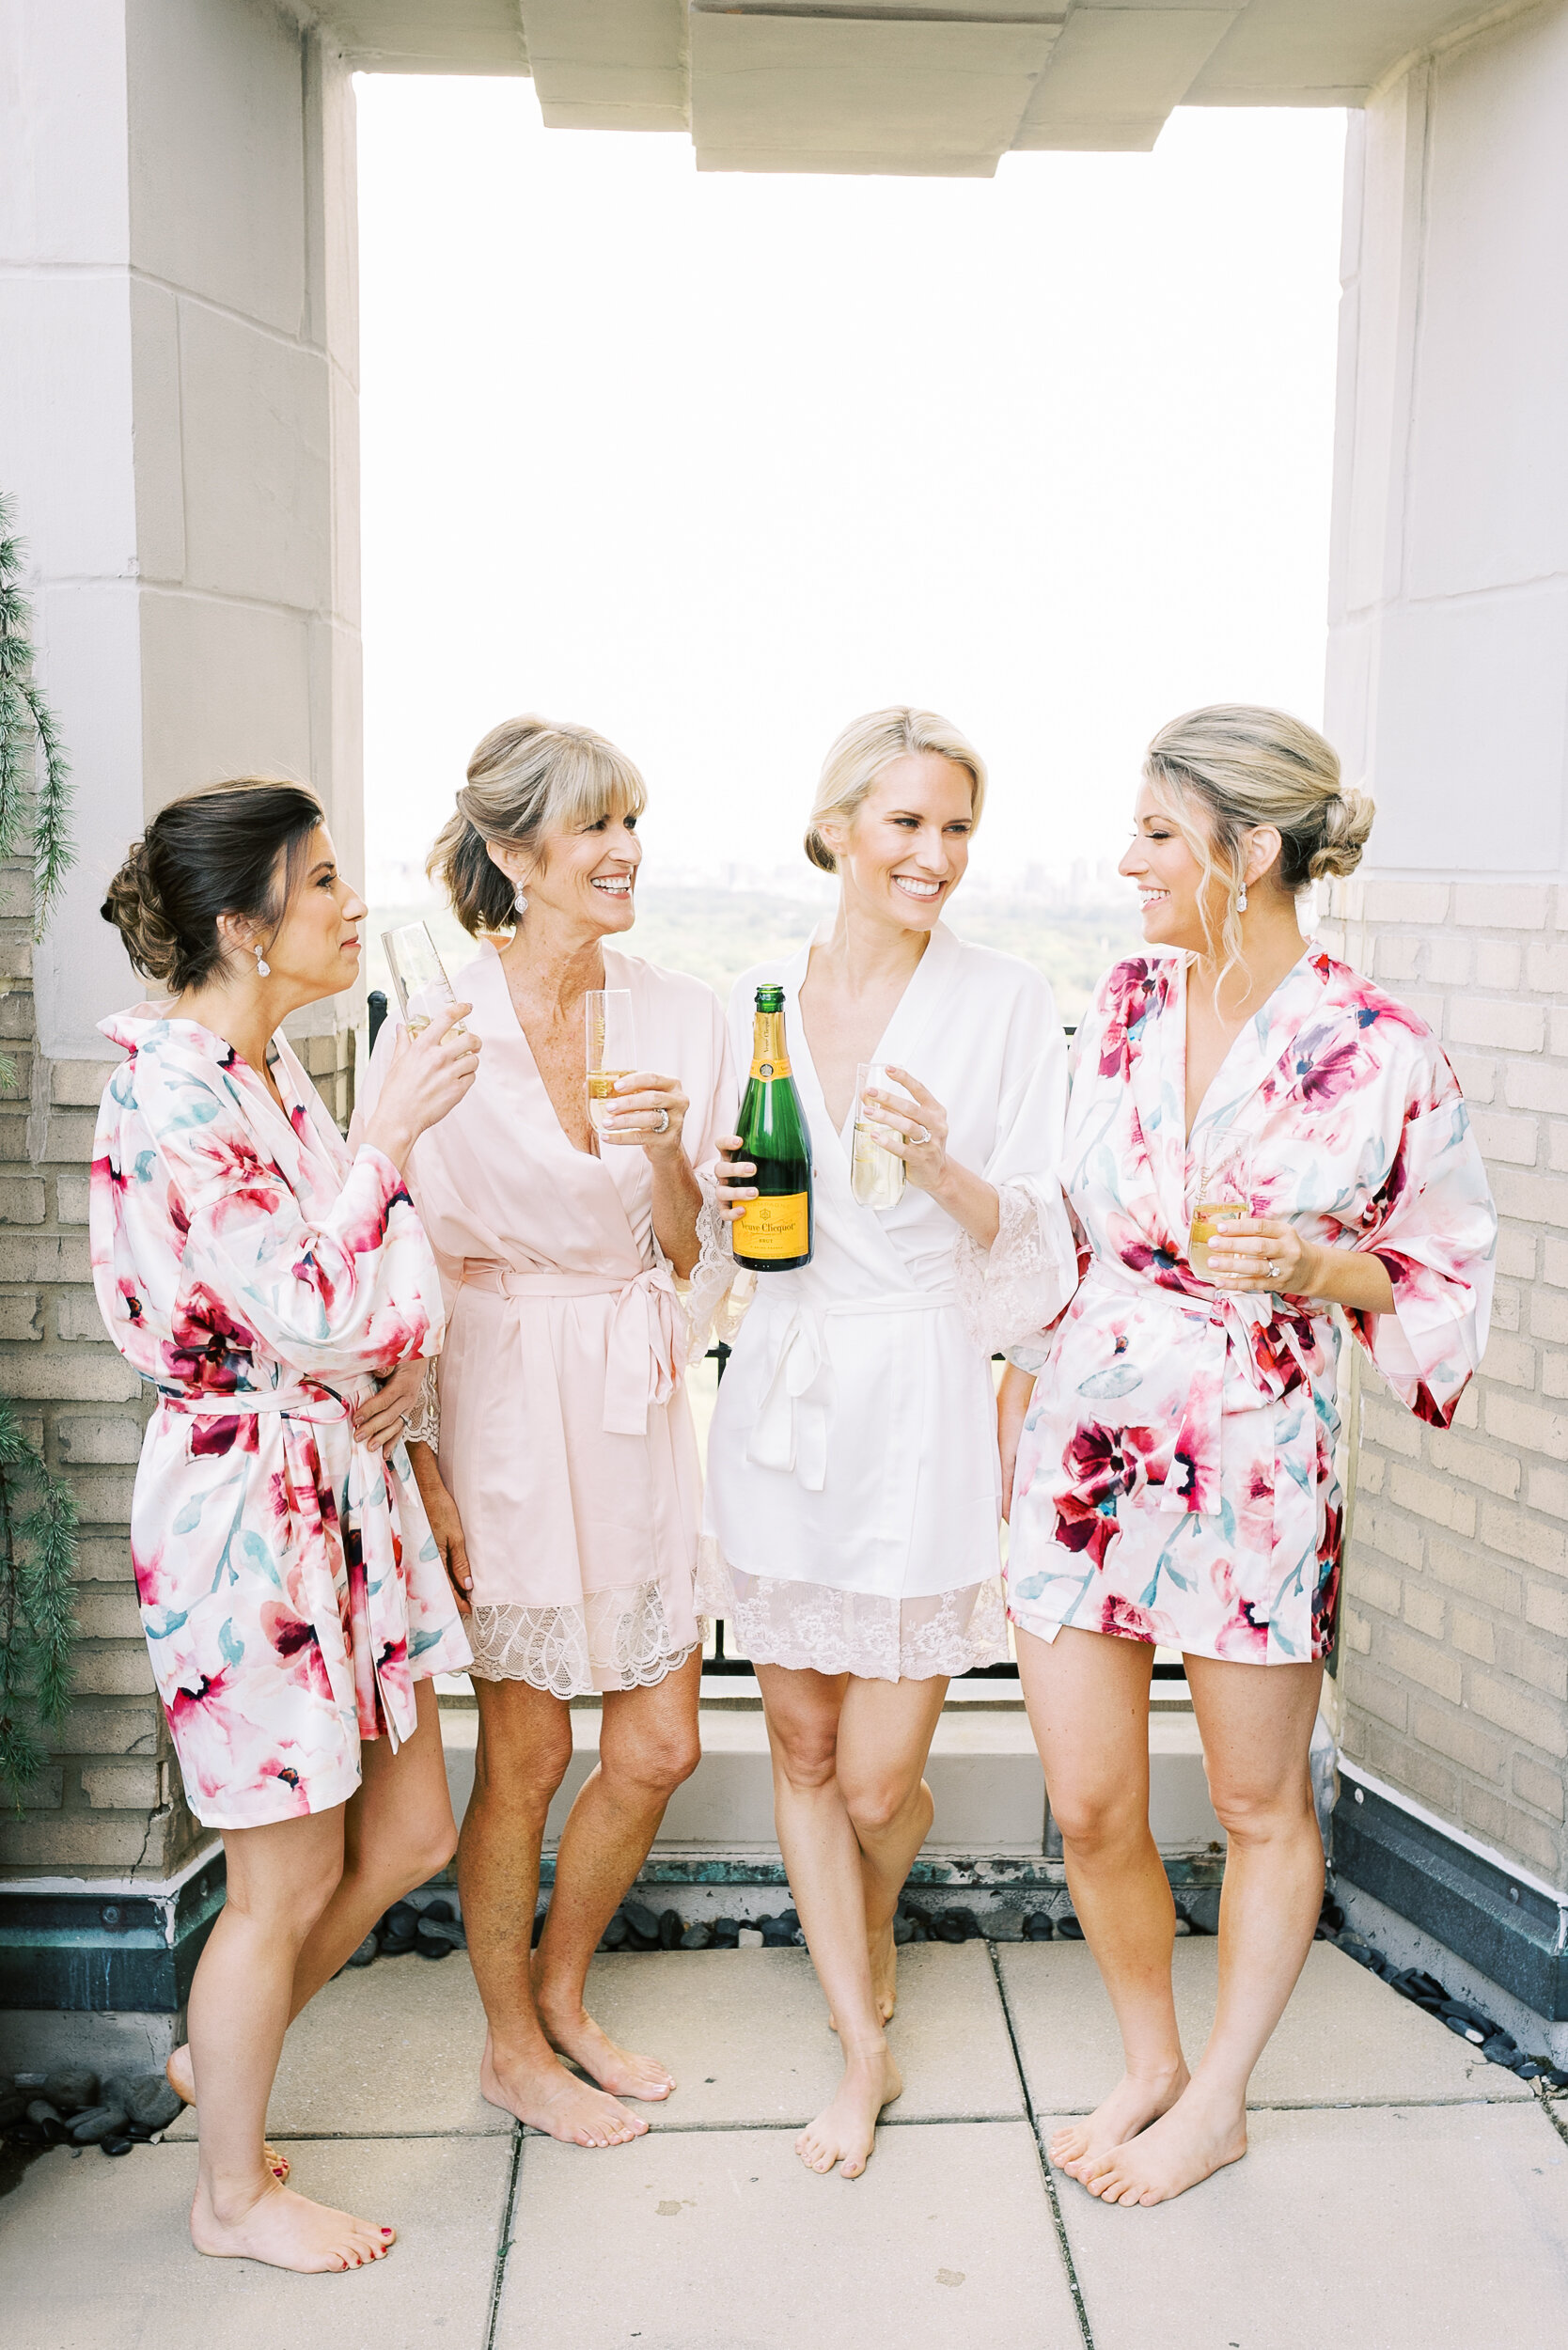 Bride, Bridesmaids, and Mother of the Bride Toasting the Wedding Day